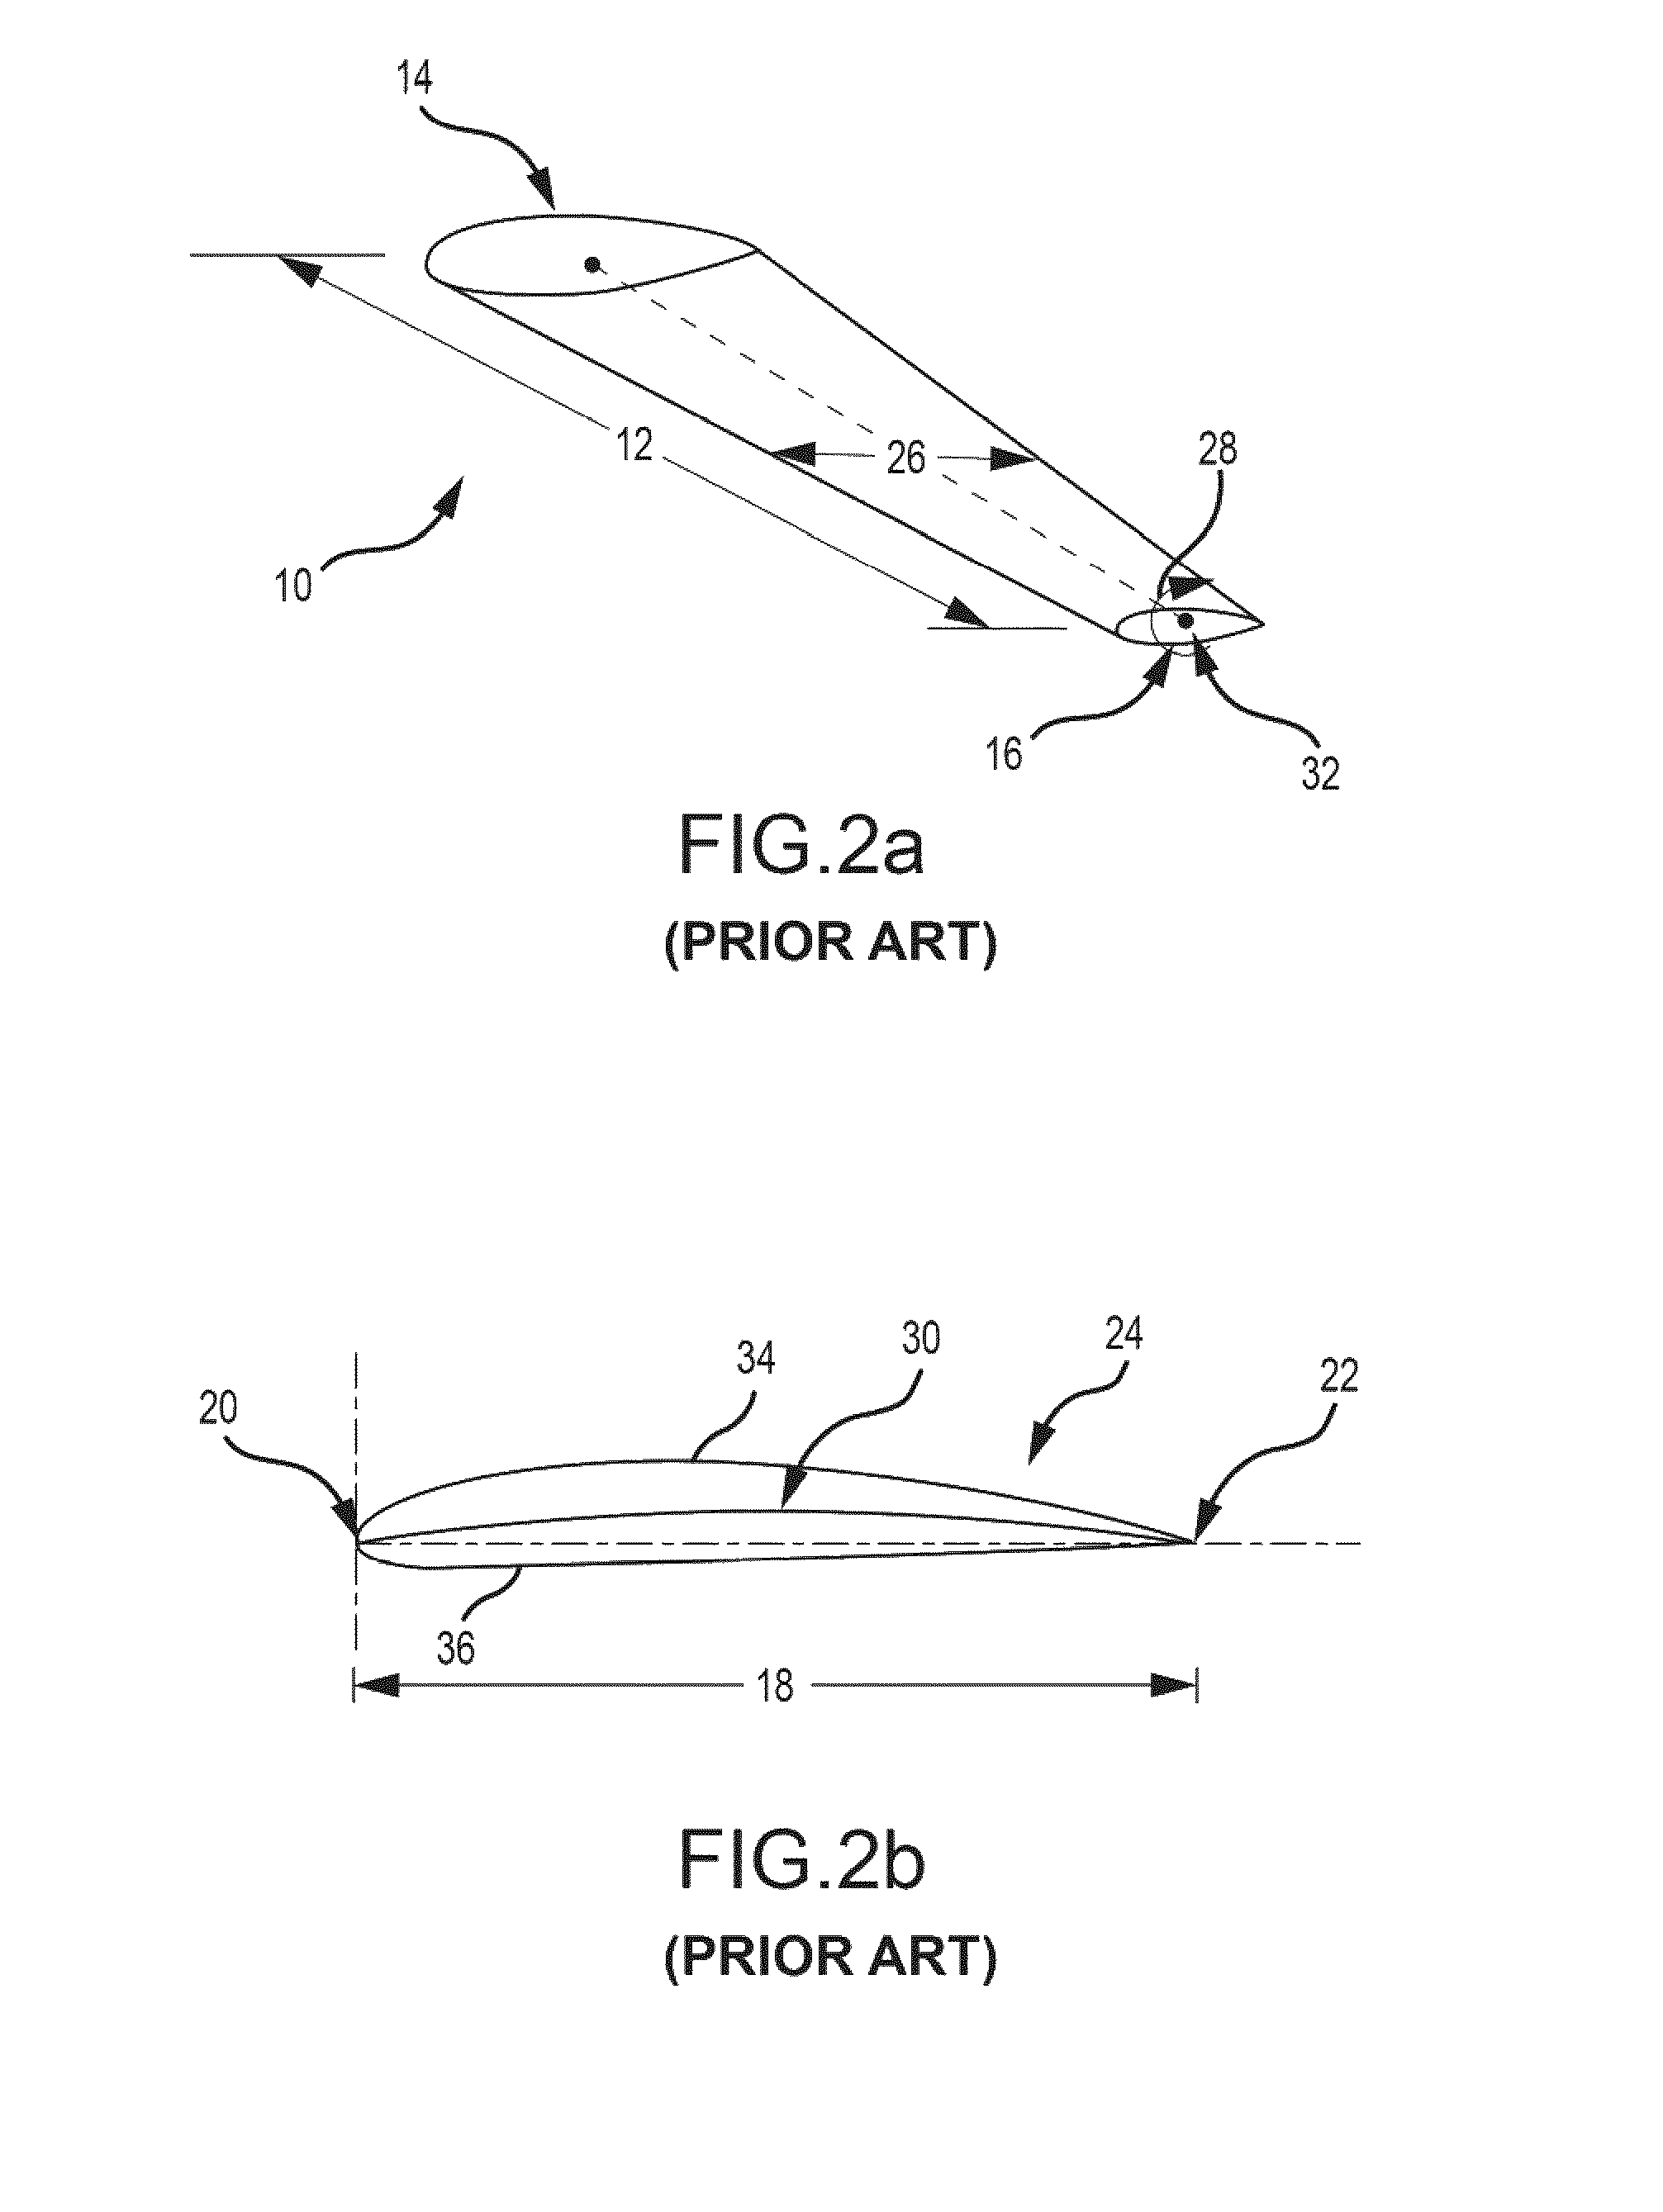 Method of manufacture of one-piece composite parts with a polymer form that transitions between its glassy and elastomeric states